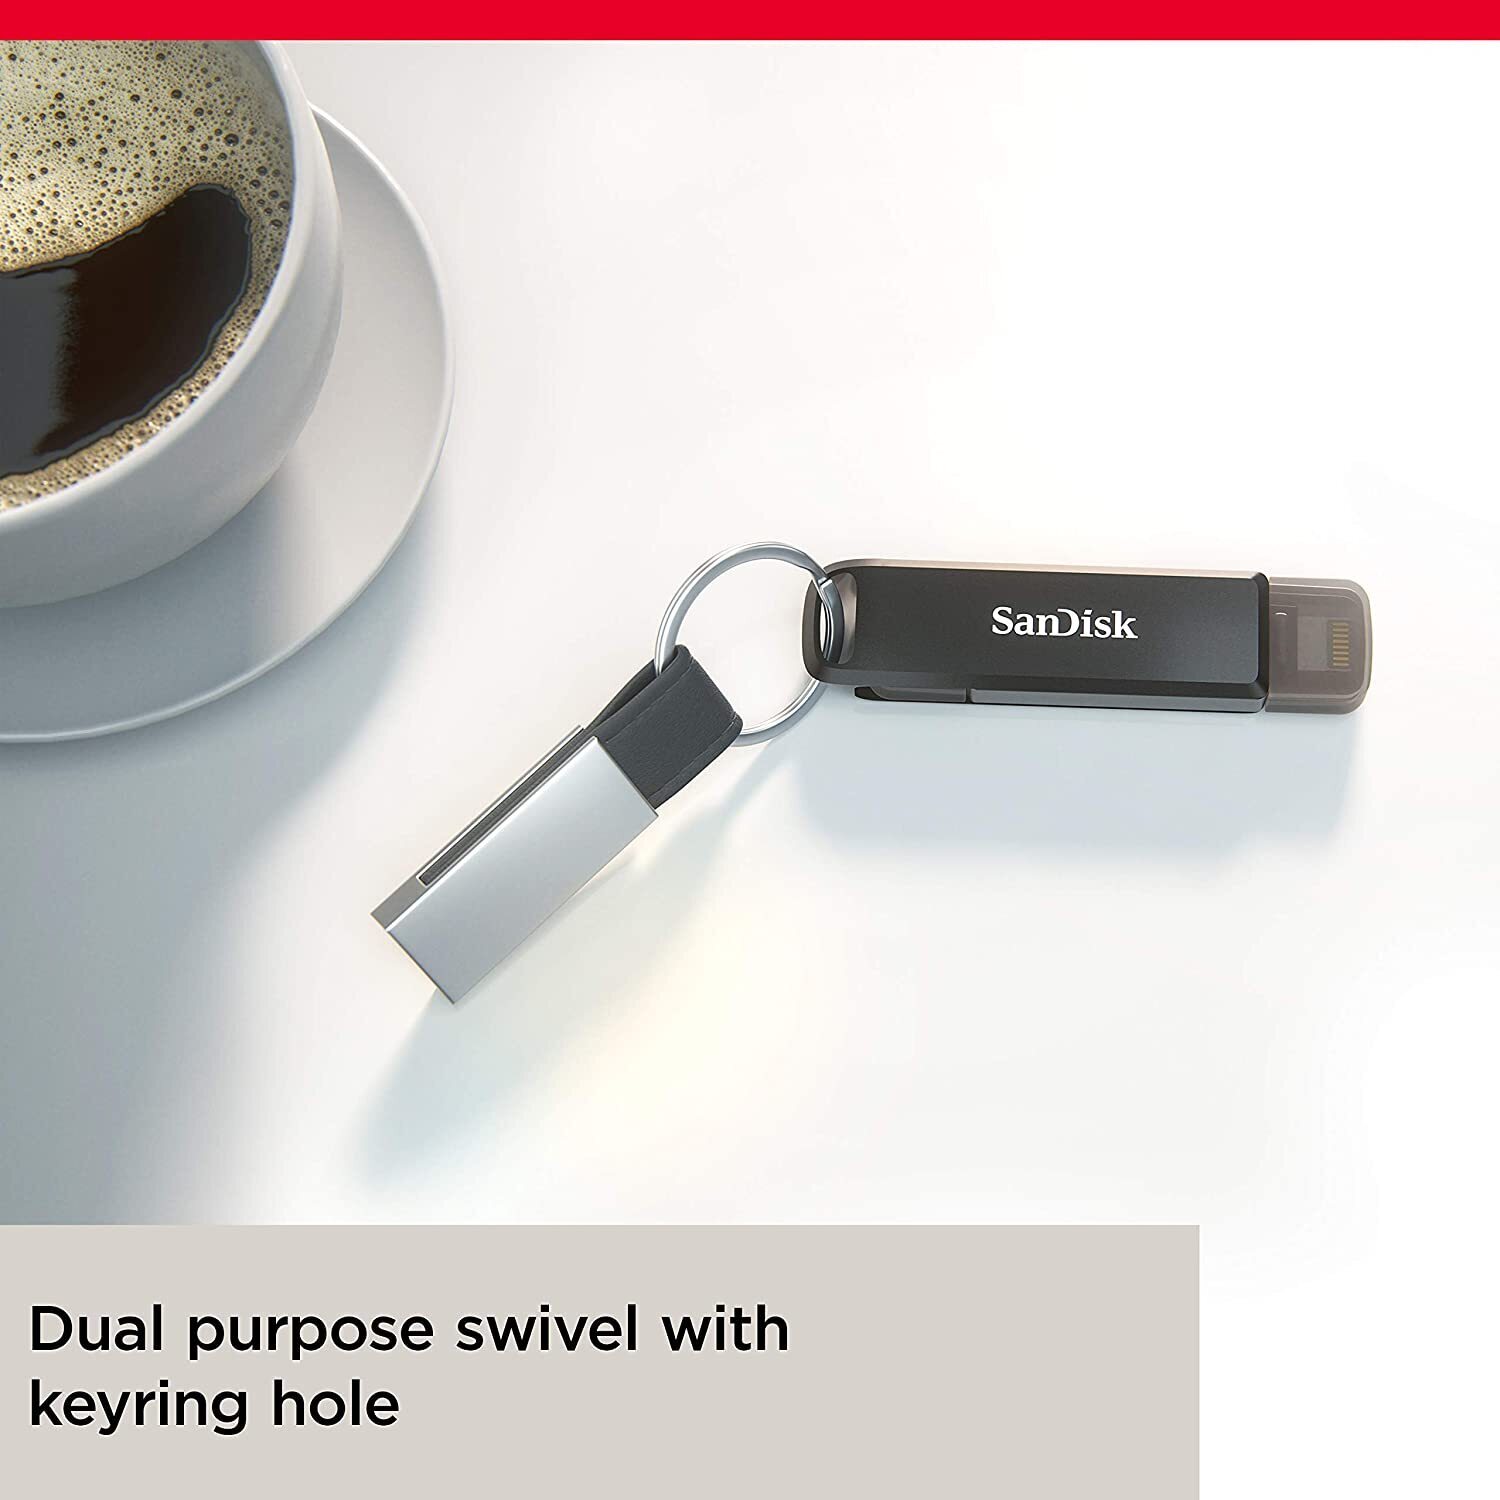 SanDisk Ultra Dual Drive Luxe USB Type-C & Lightnight Connector